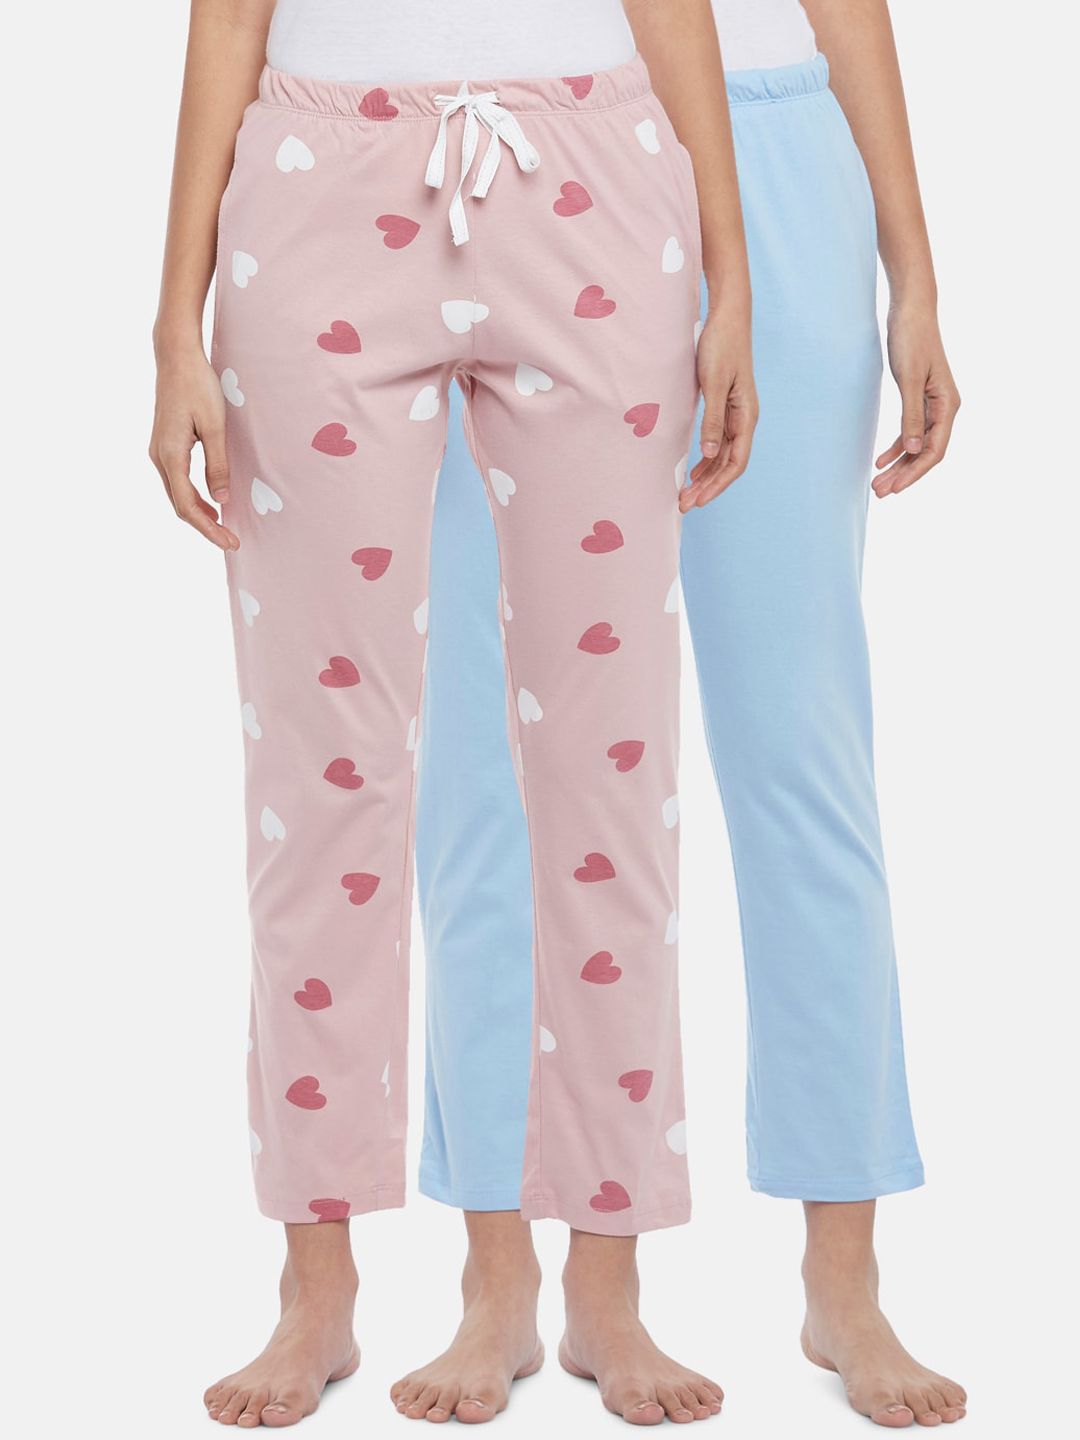 Dreamz by Pantaloons Women Pack of 2 Printed Cotton Lounge Pants Price in India